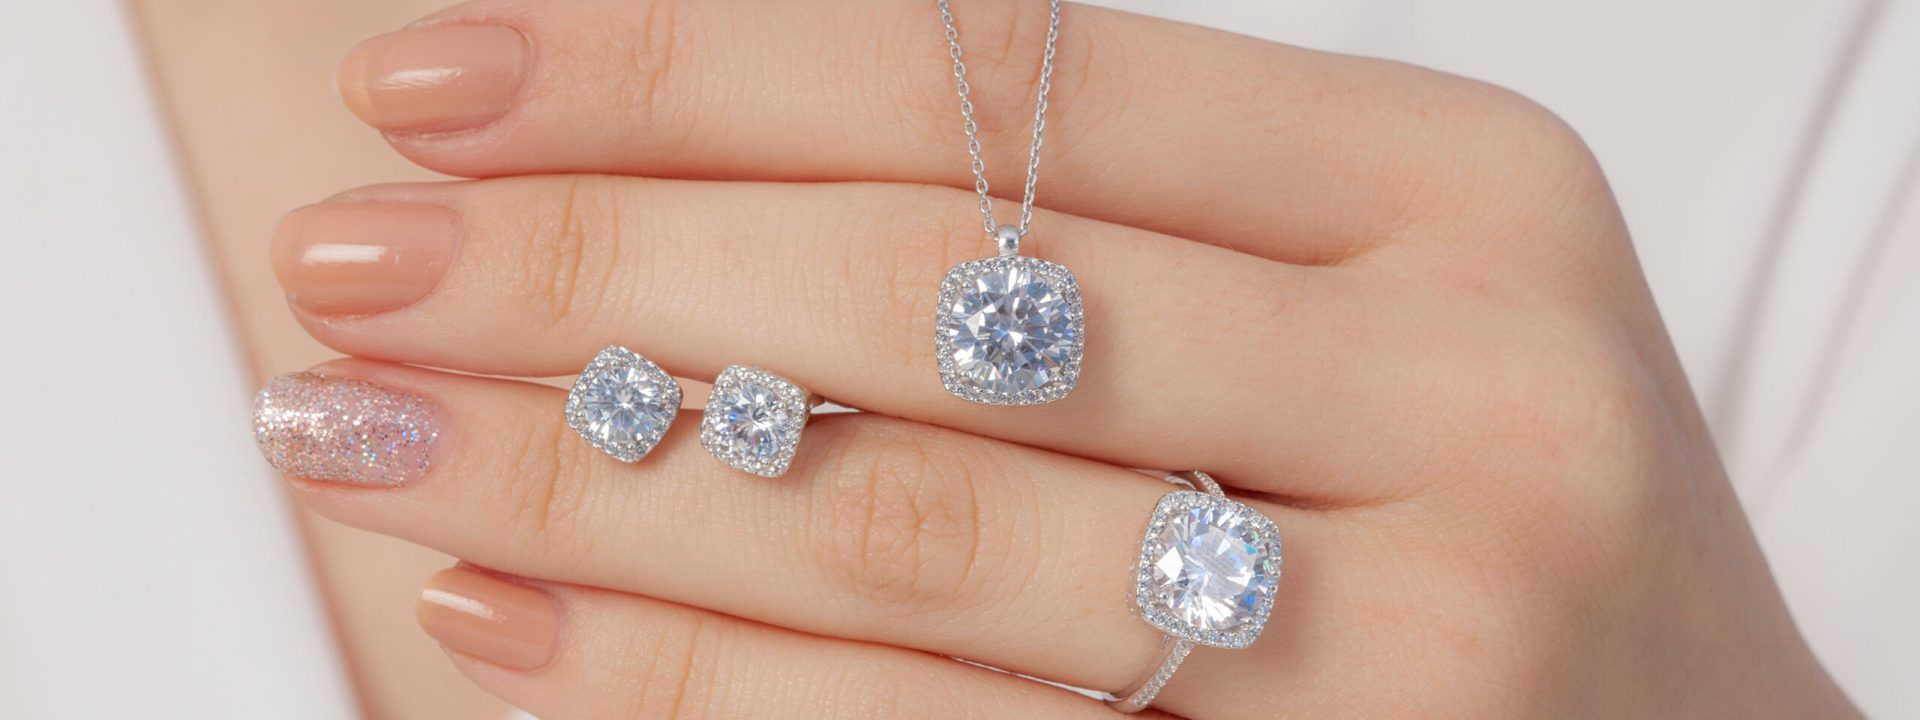 Woman's hand featuring diamond stud earrings, diamond engagement ring, and diamond pendant necklace.